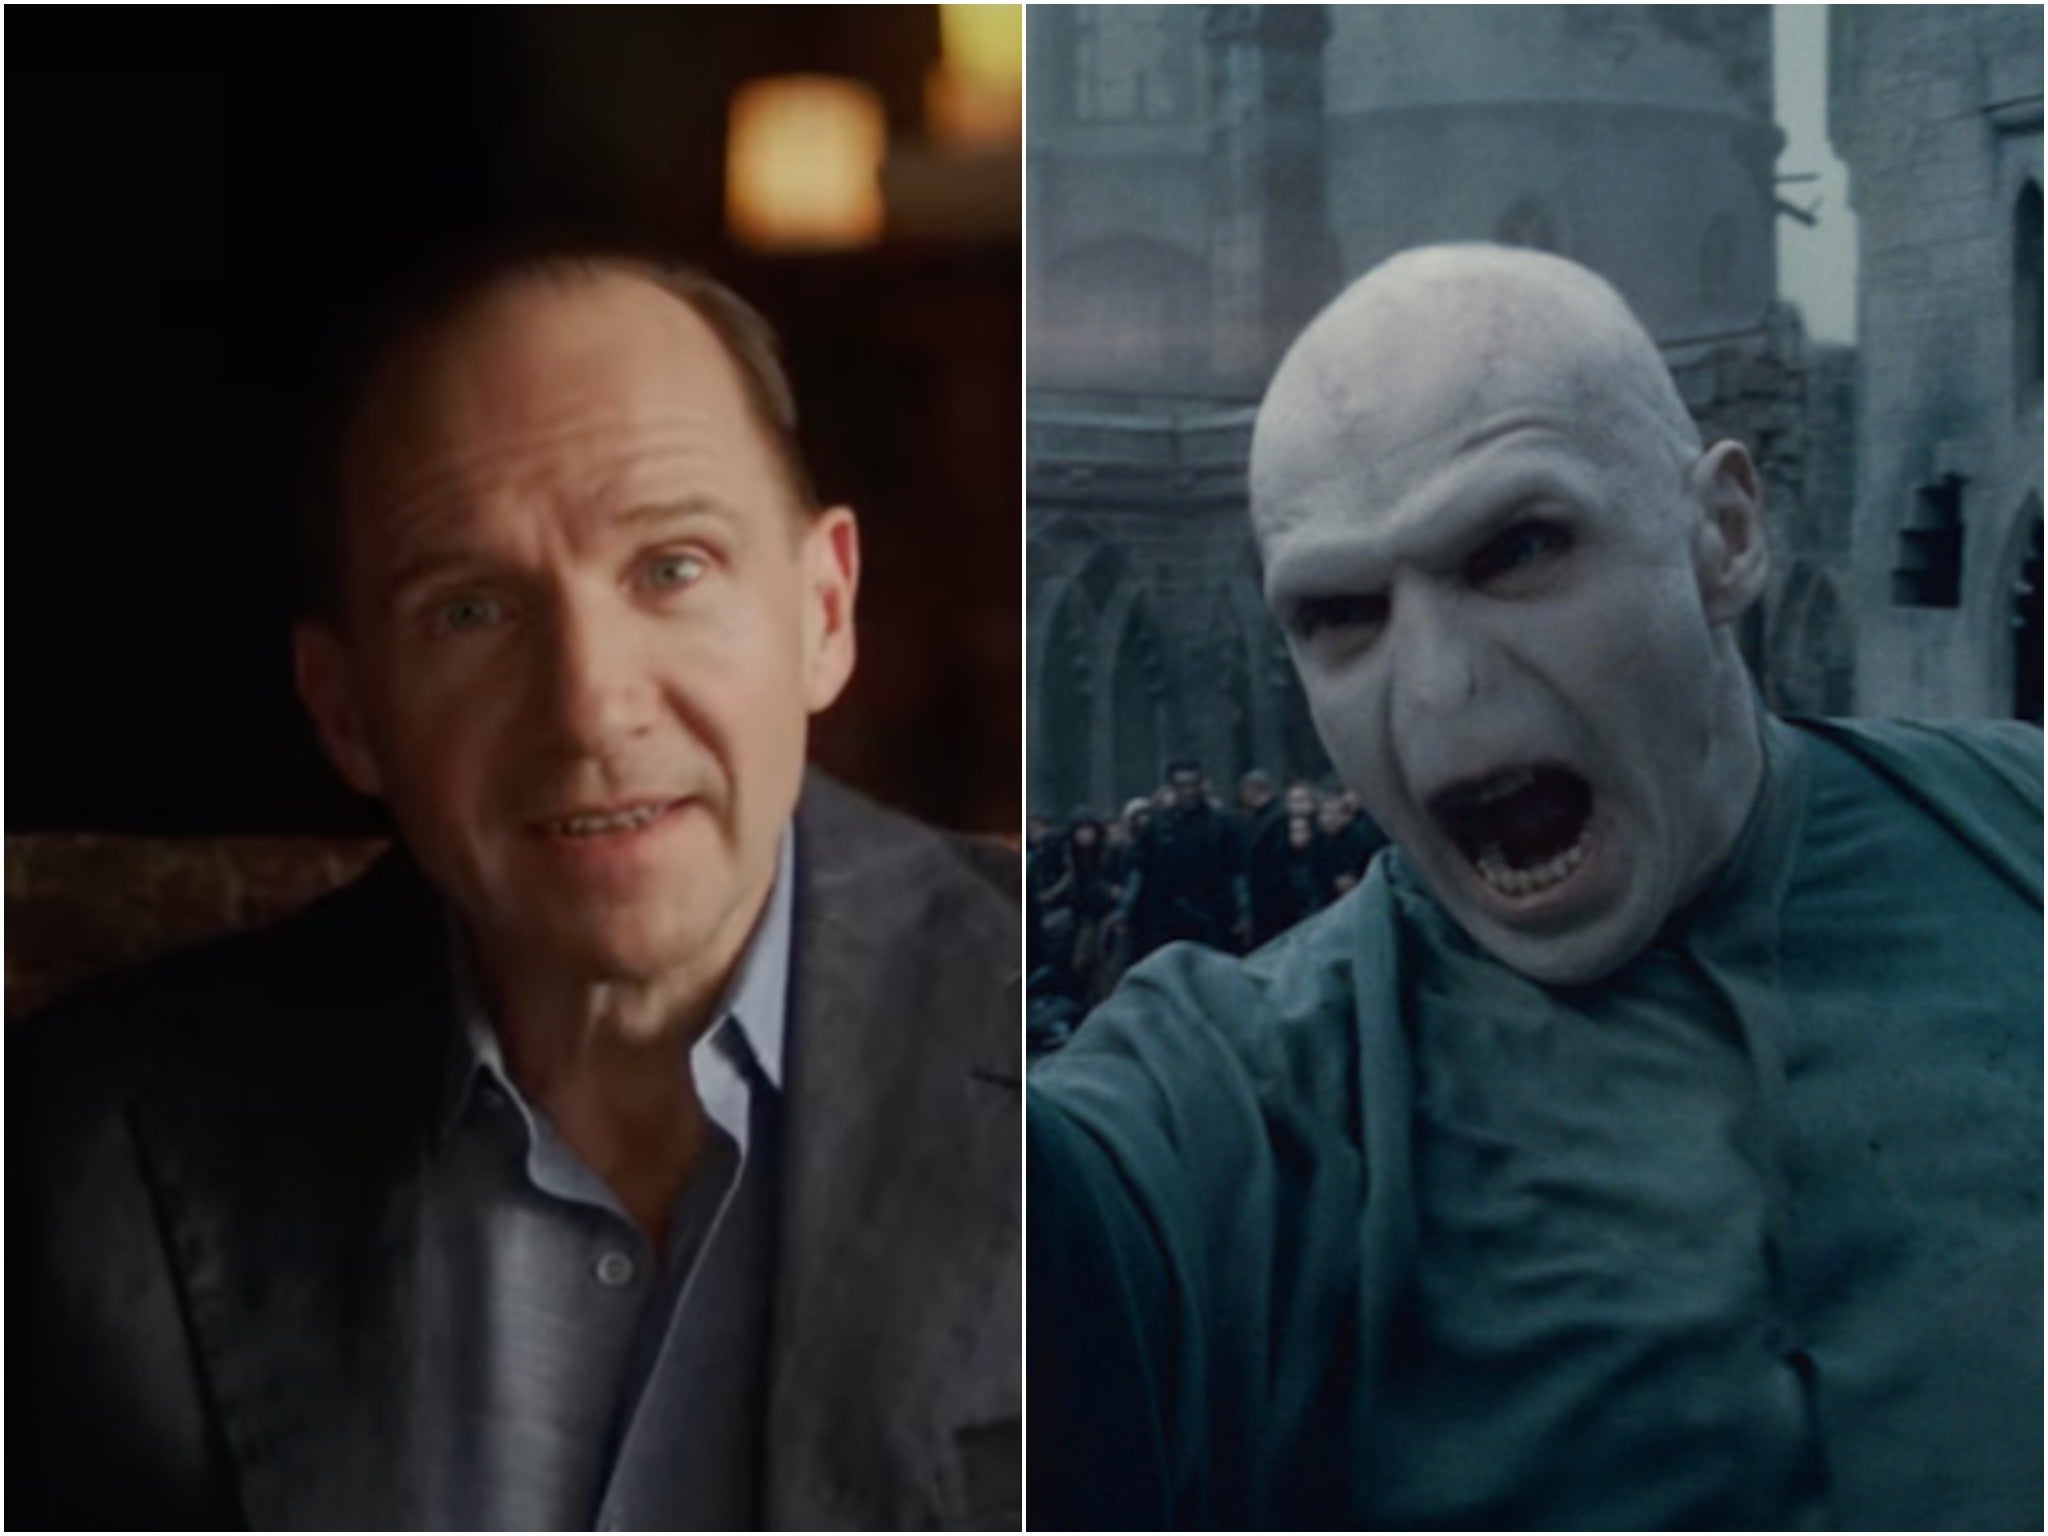 Vodlemort actor Ralph Fiennes will be a part of the reunion special